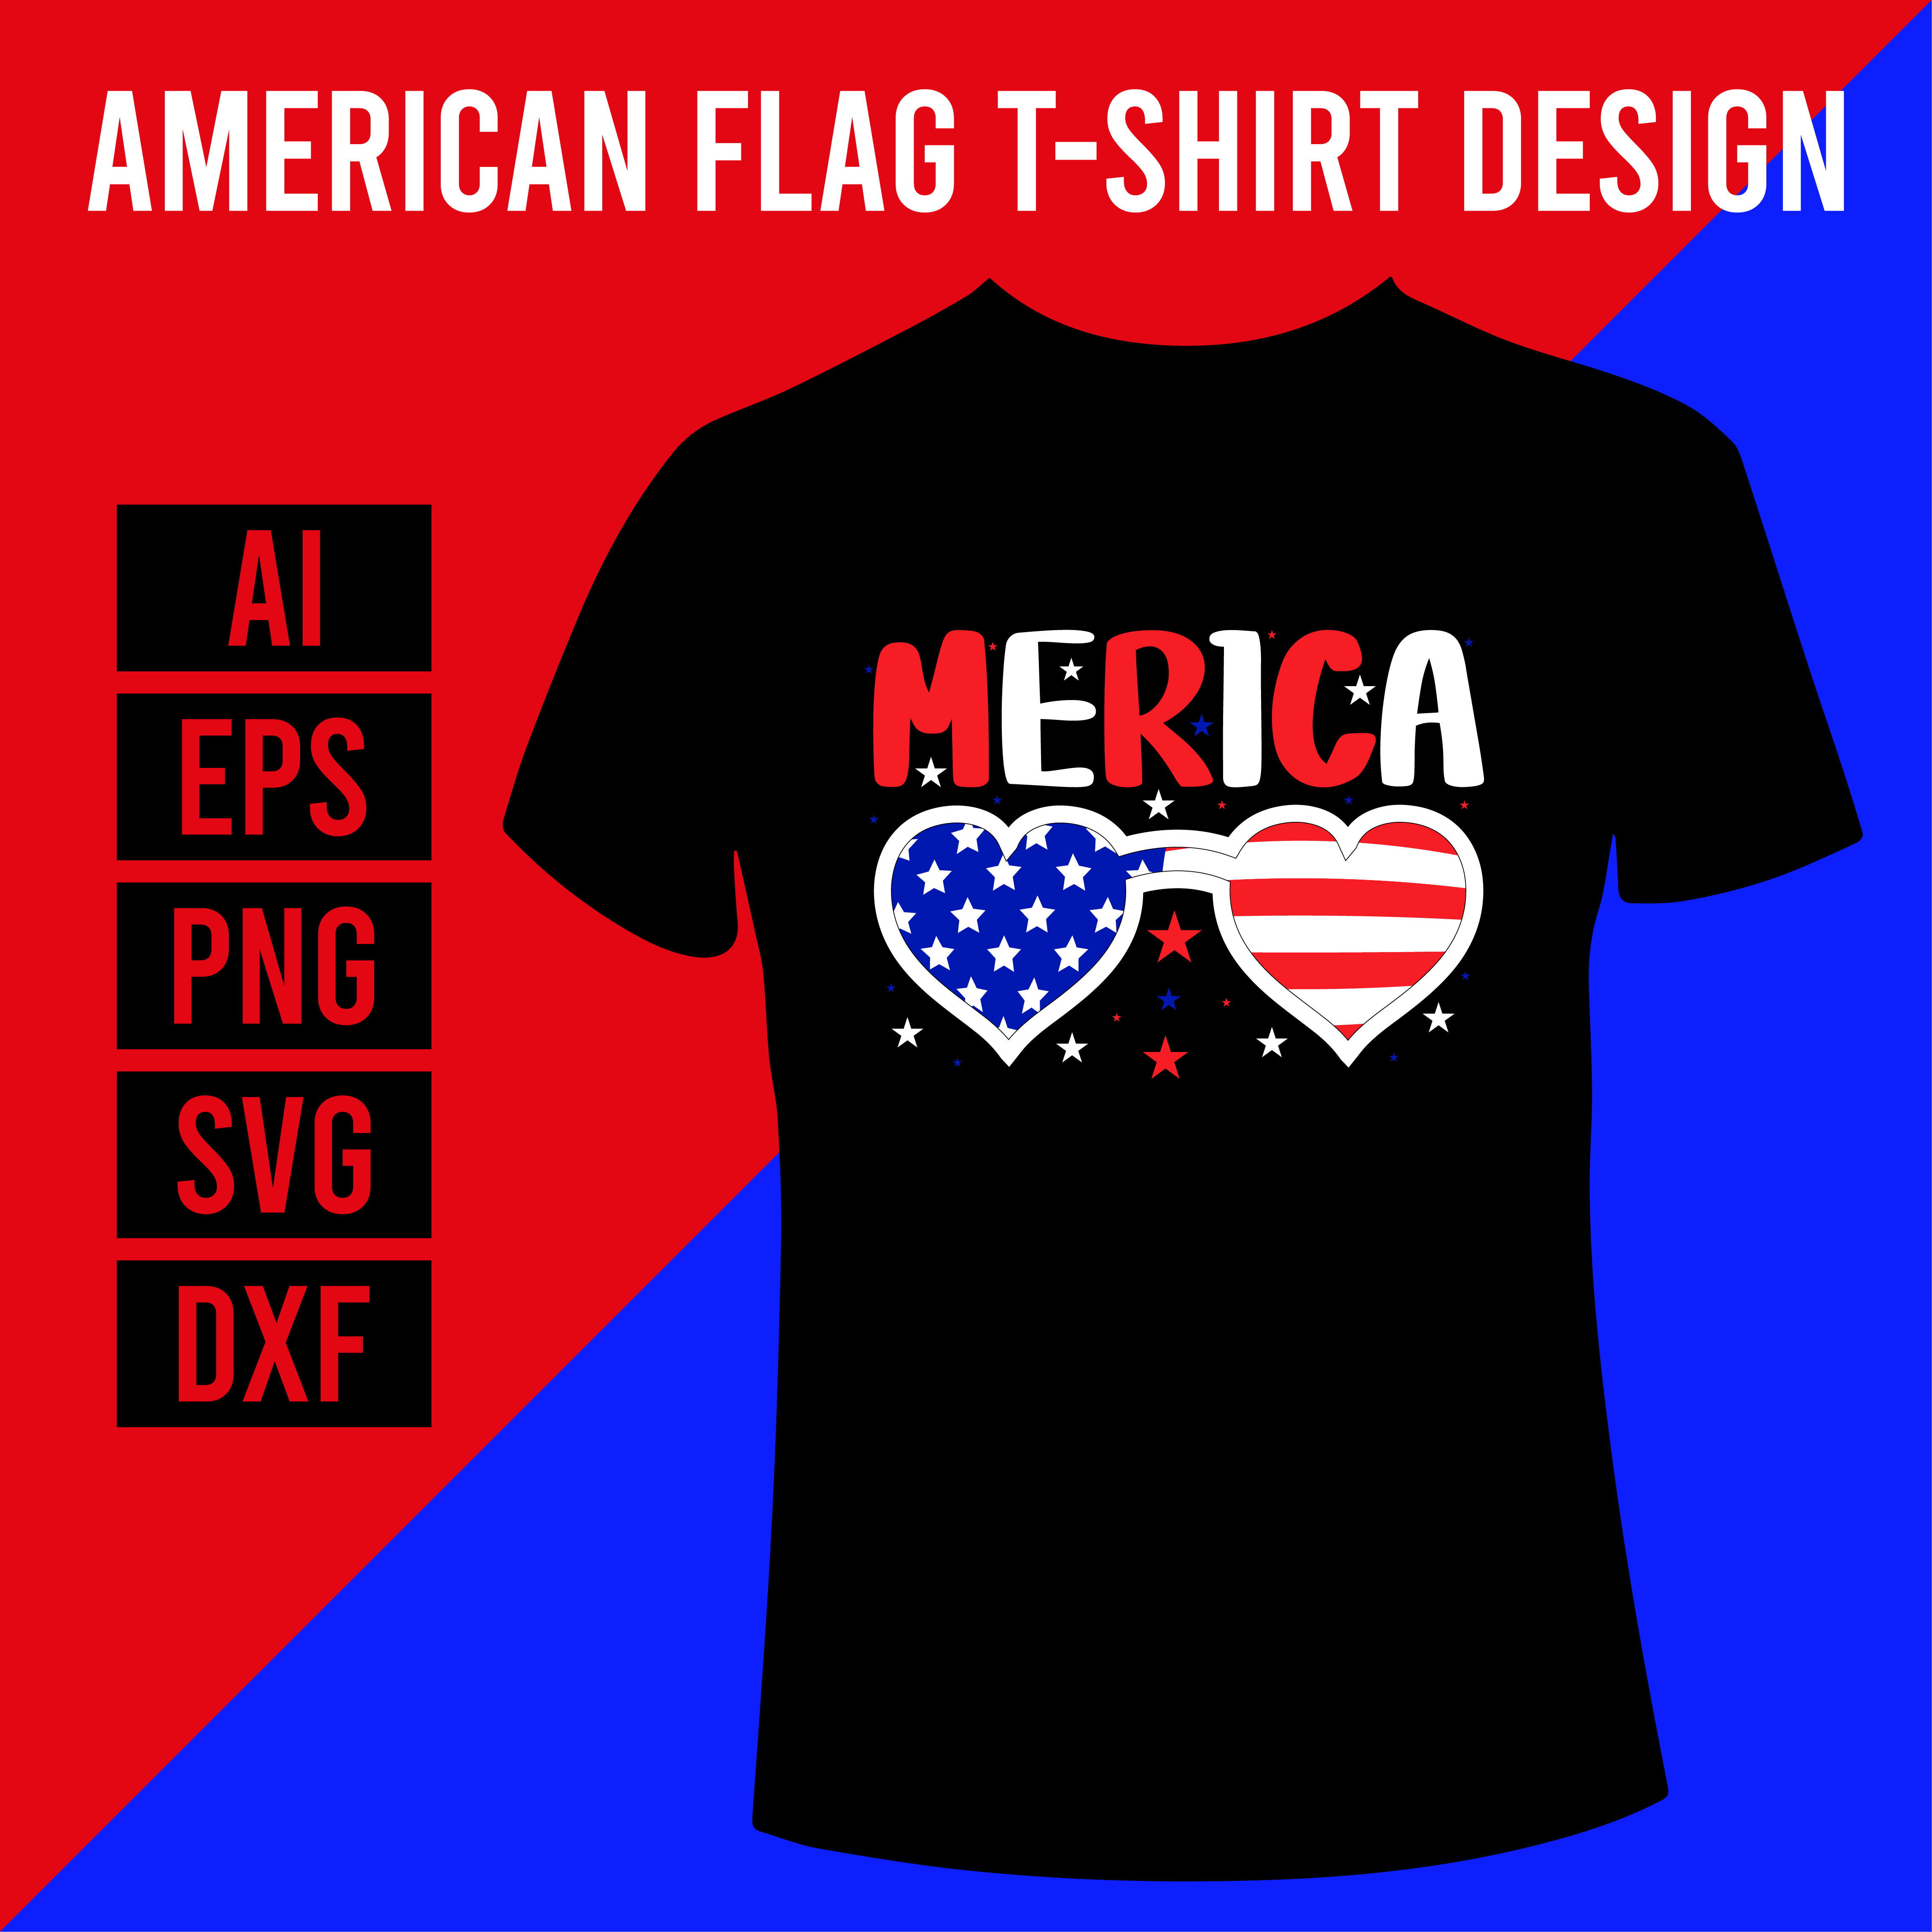 American Flag T-Shirt Design cover image.